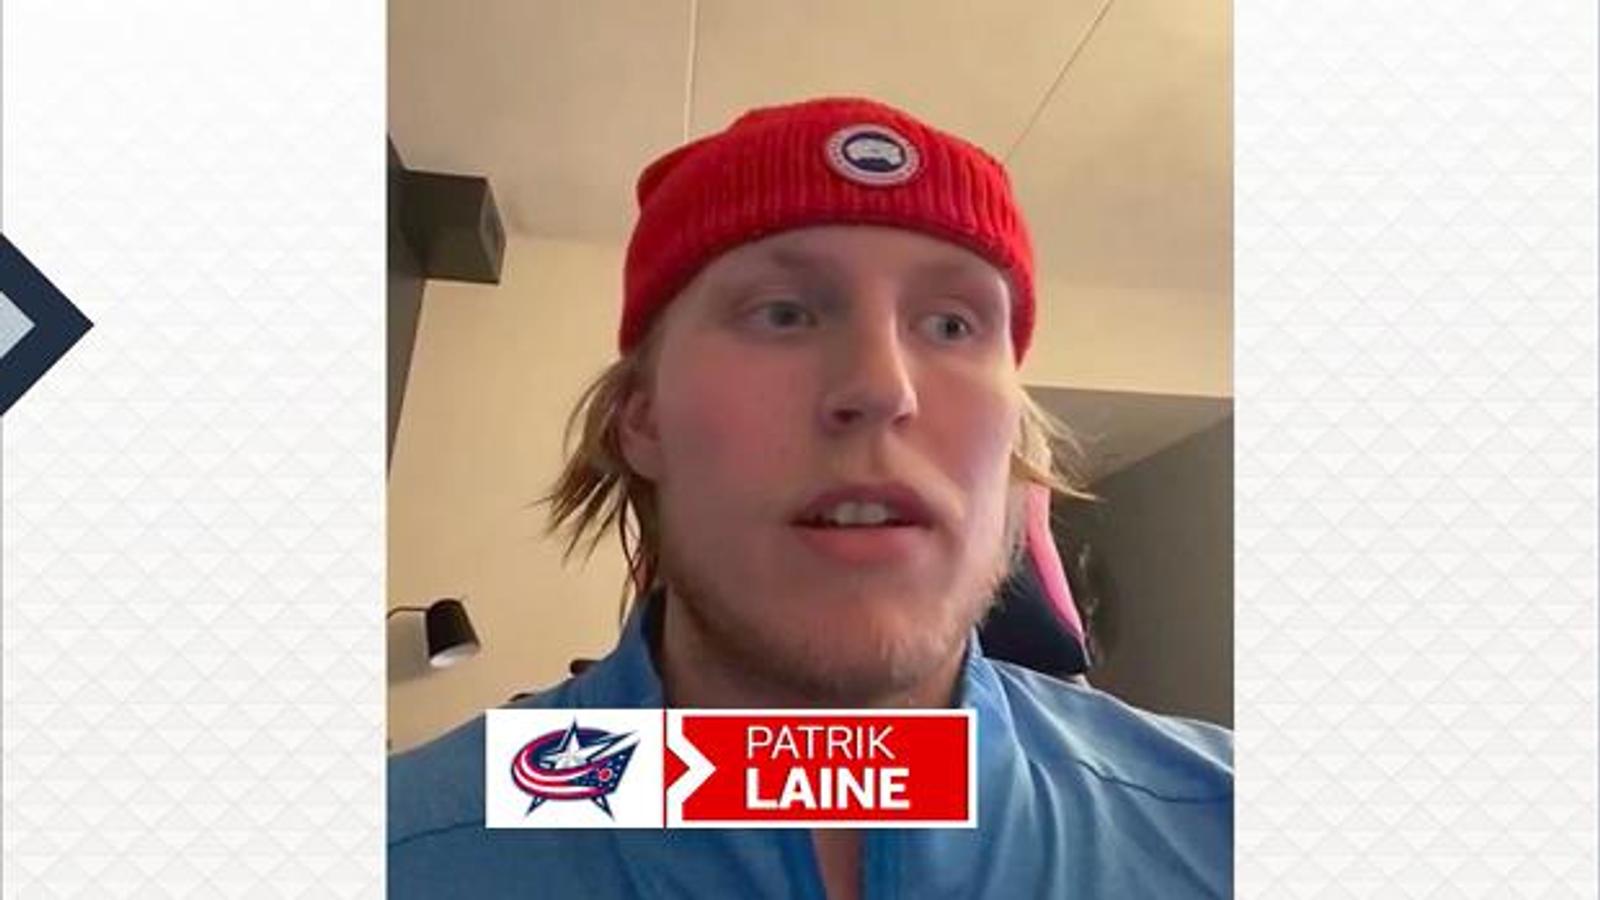 Bad feeling about Laine already rises across the NHL following trade to Columbus 